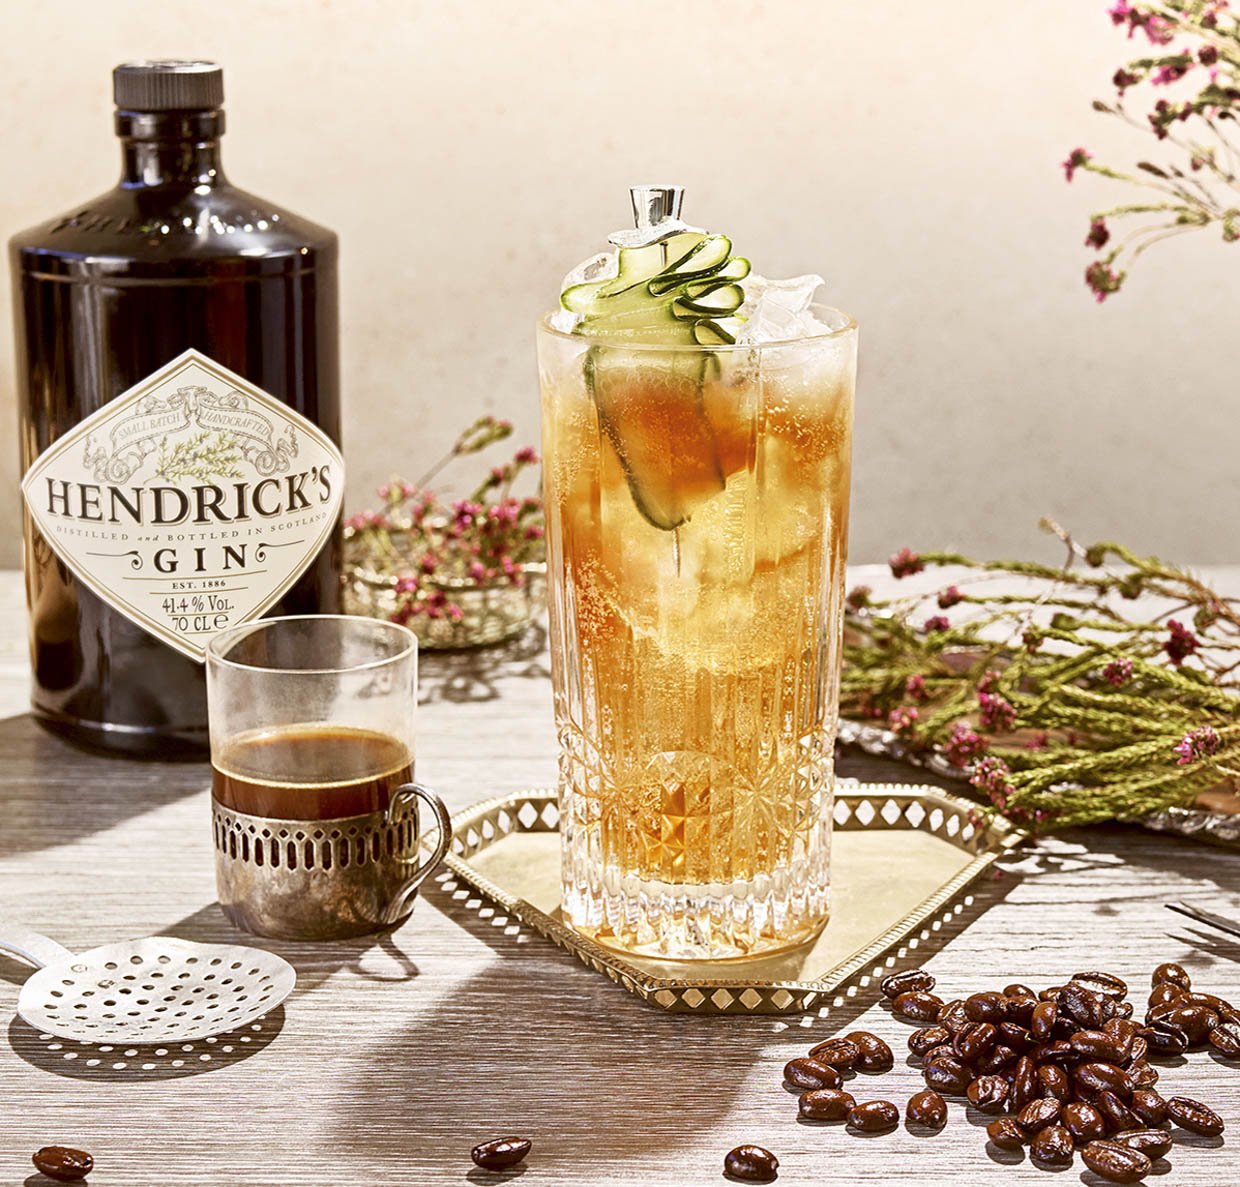 How to Make a Supersonic Gin + Tonic with Hendrick's Gin and Espresso